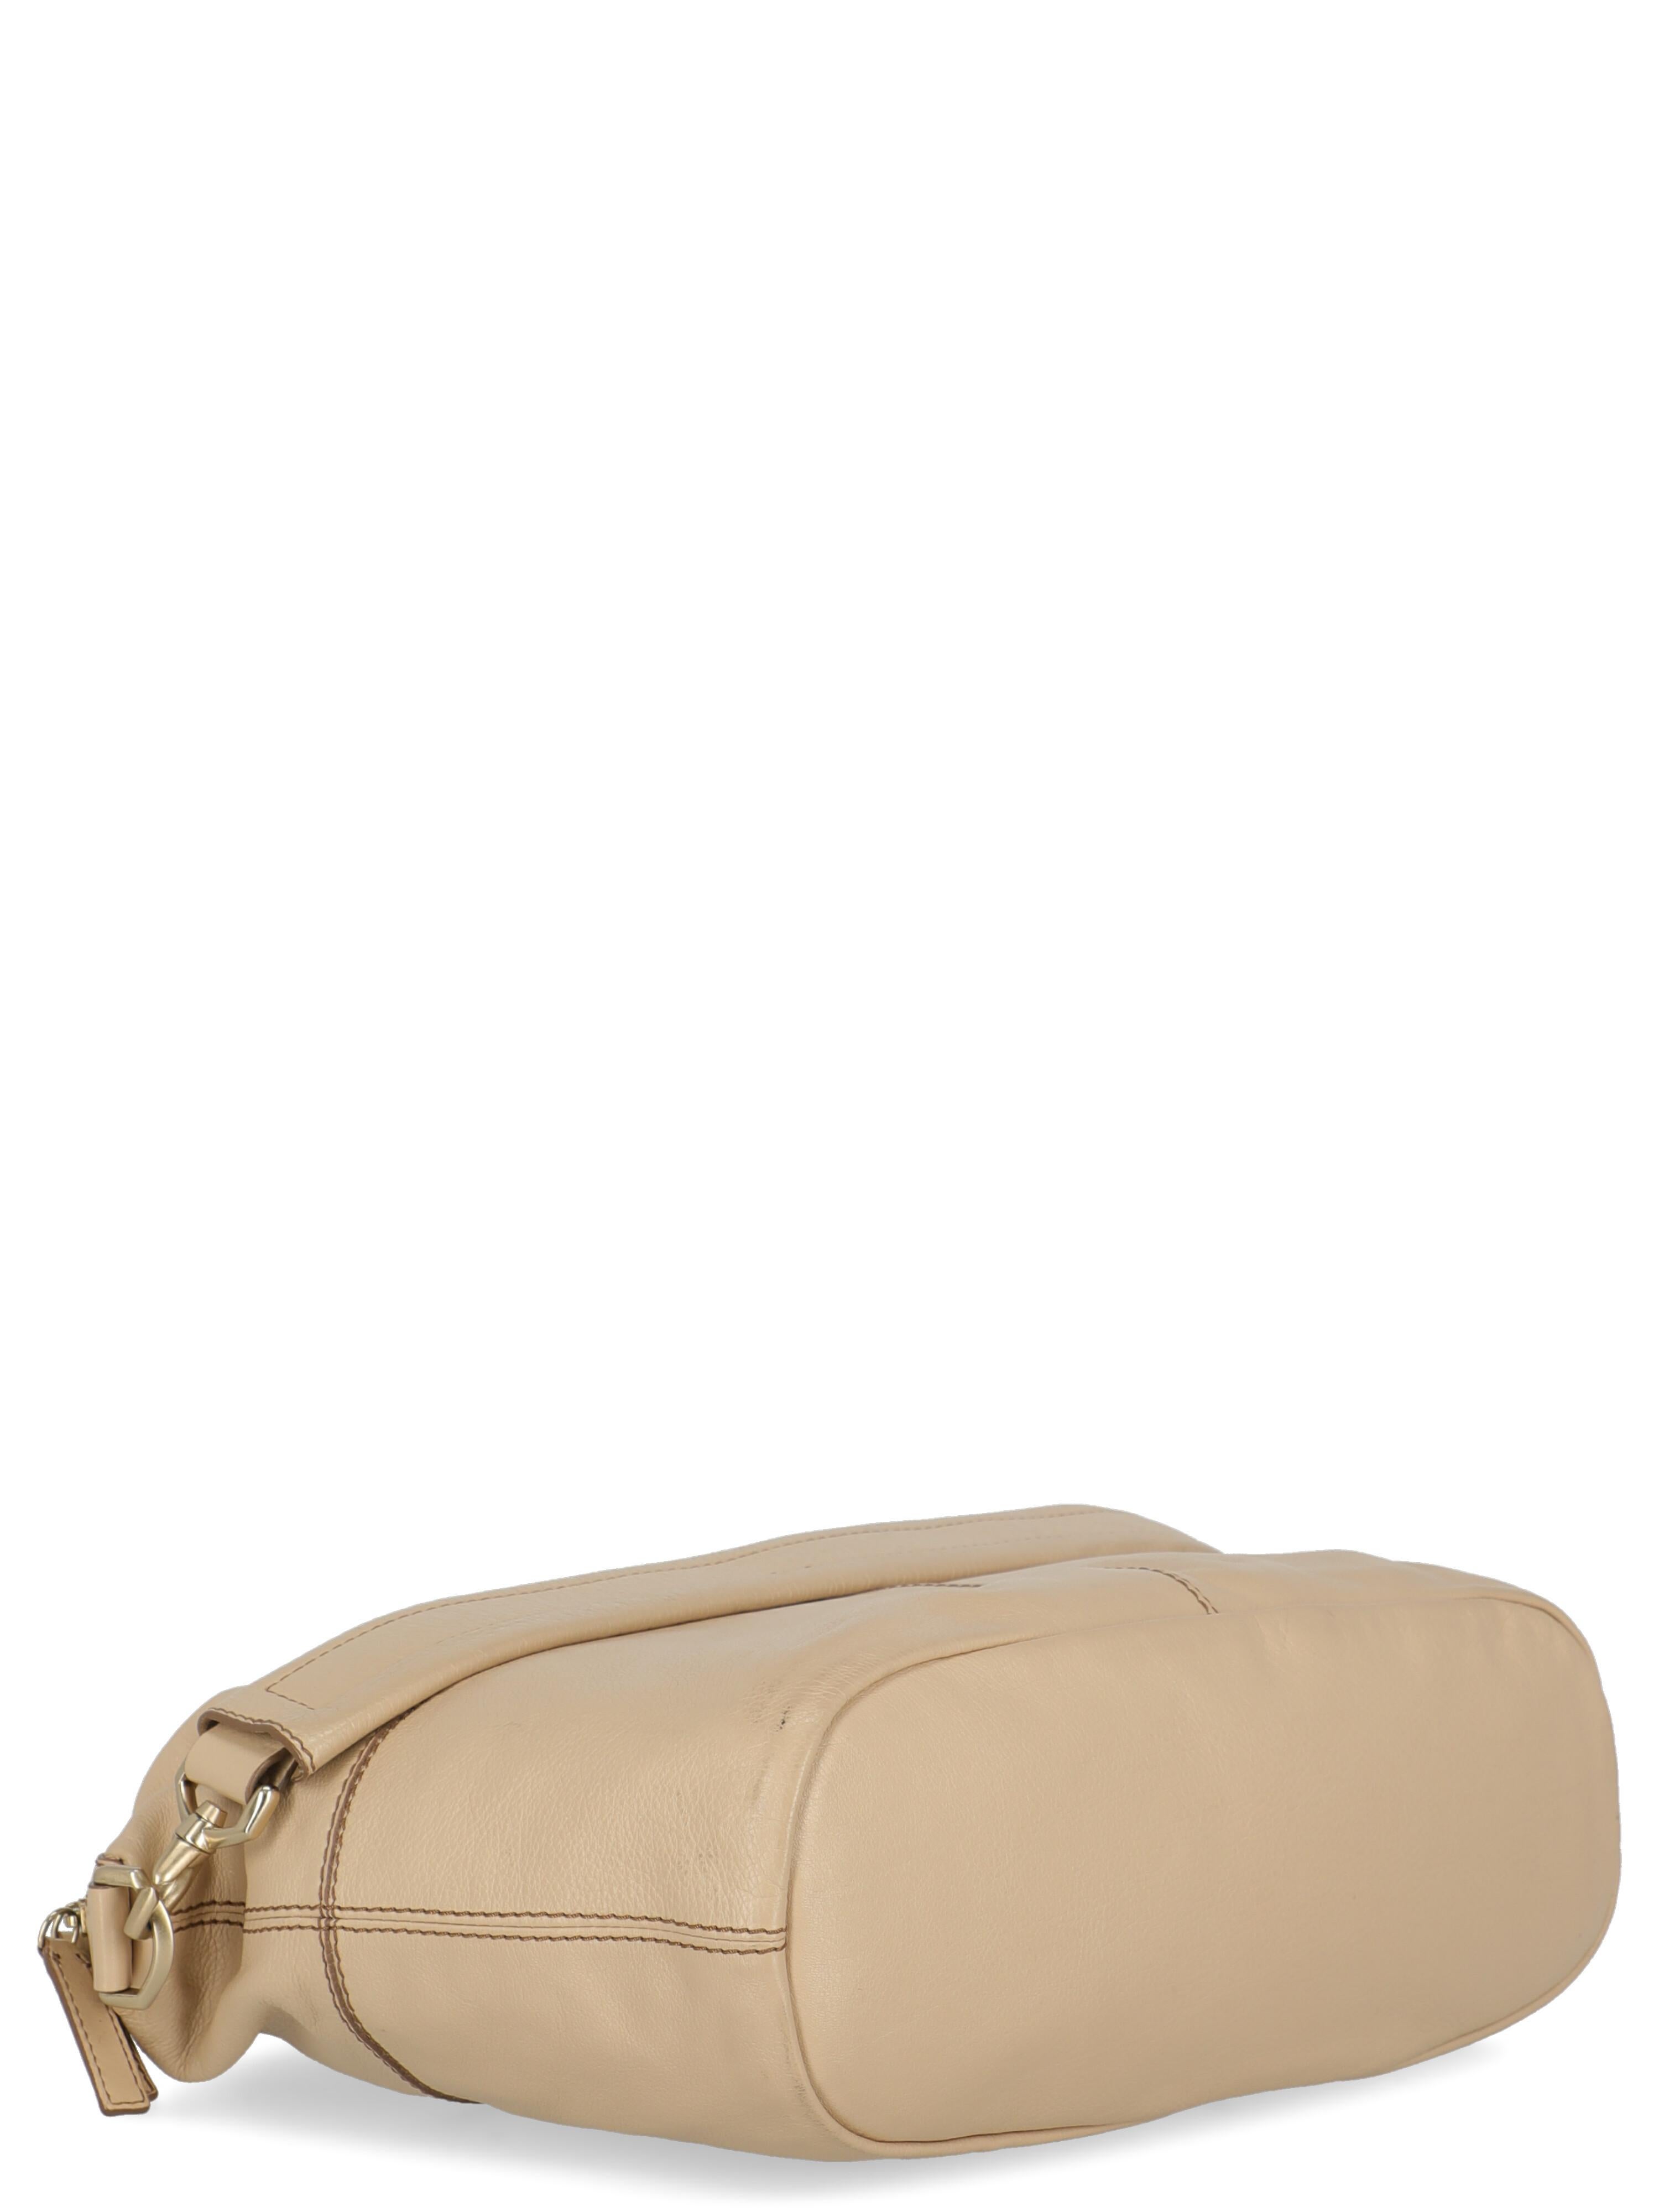 Women's Givenchy Women  Handbags  Nightingale Beige Leather For Sale